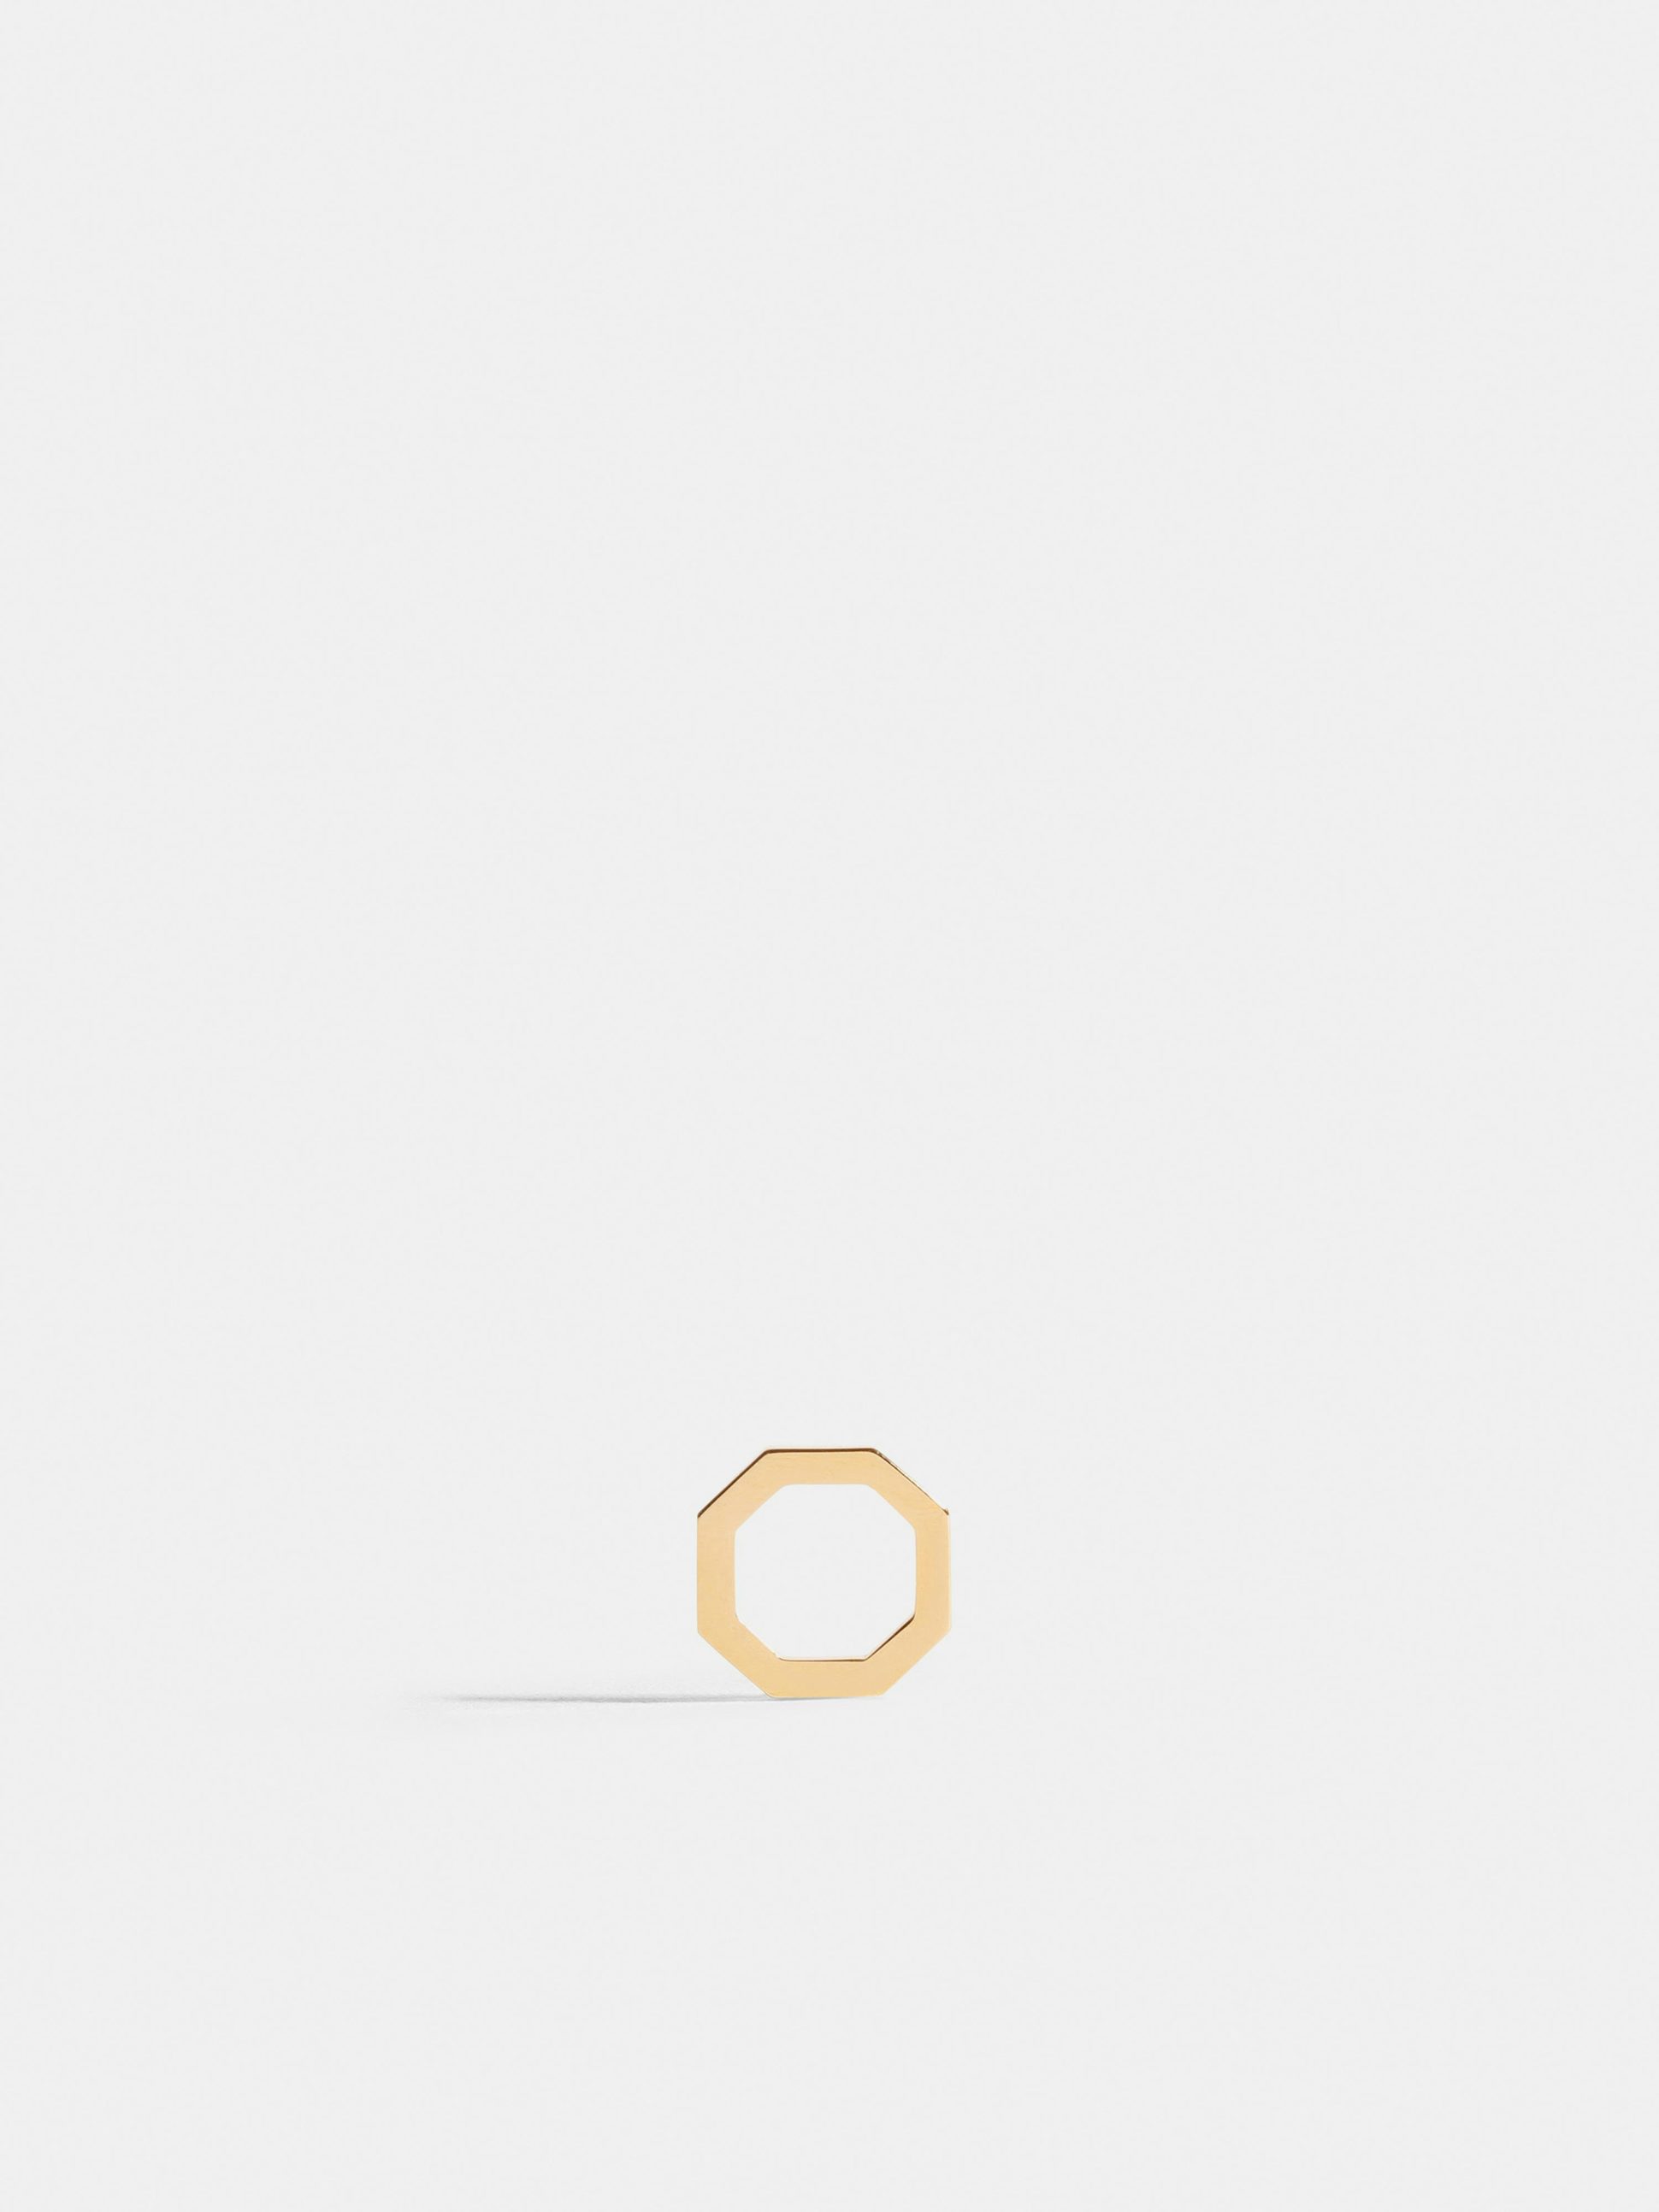 Octogone motif in 18k Fairmined ethical yellow gold, on a bright orange cord. 